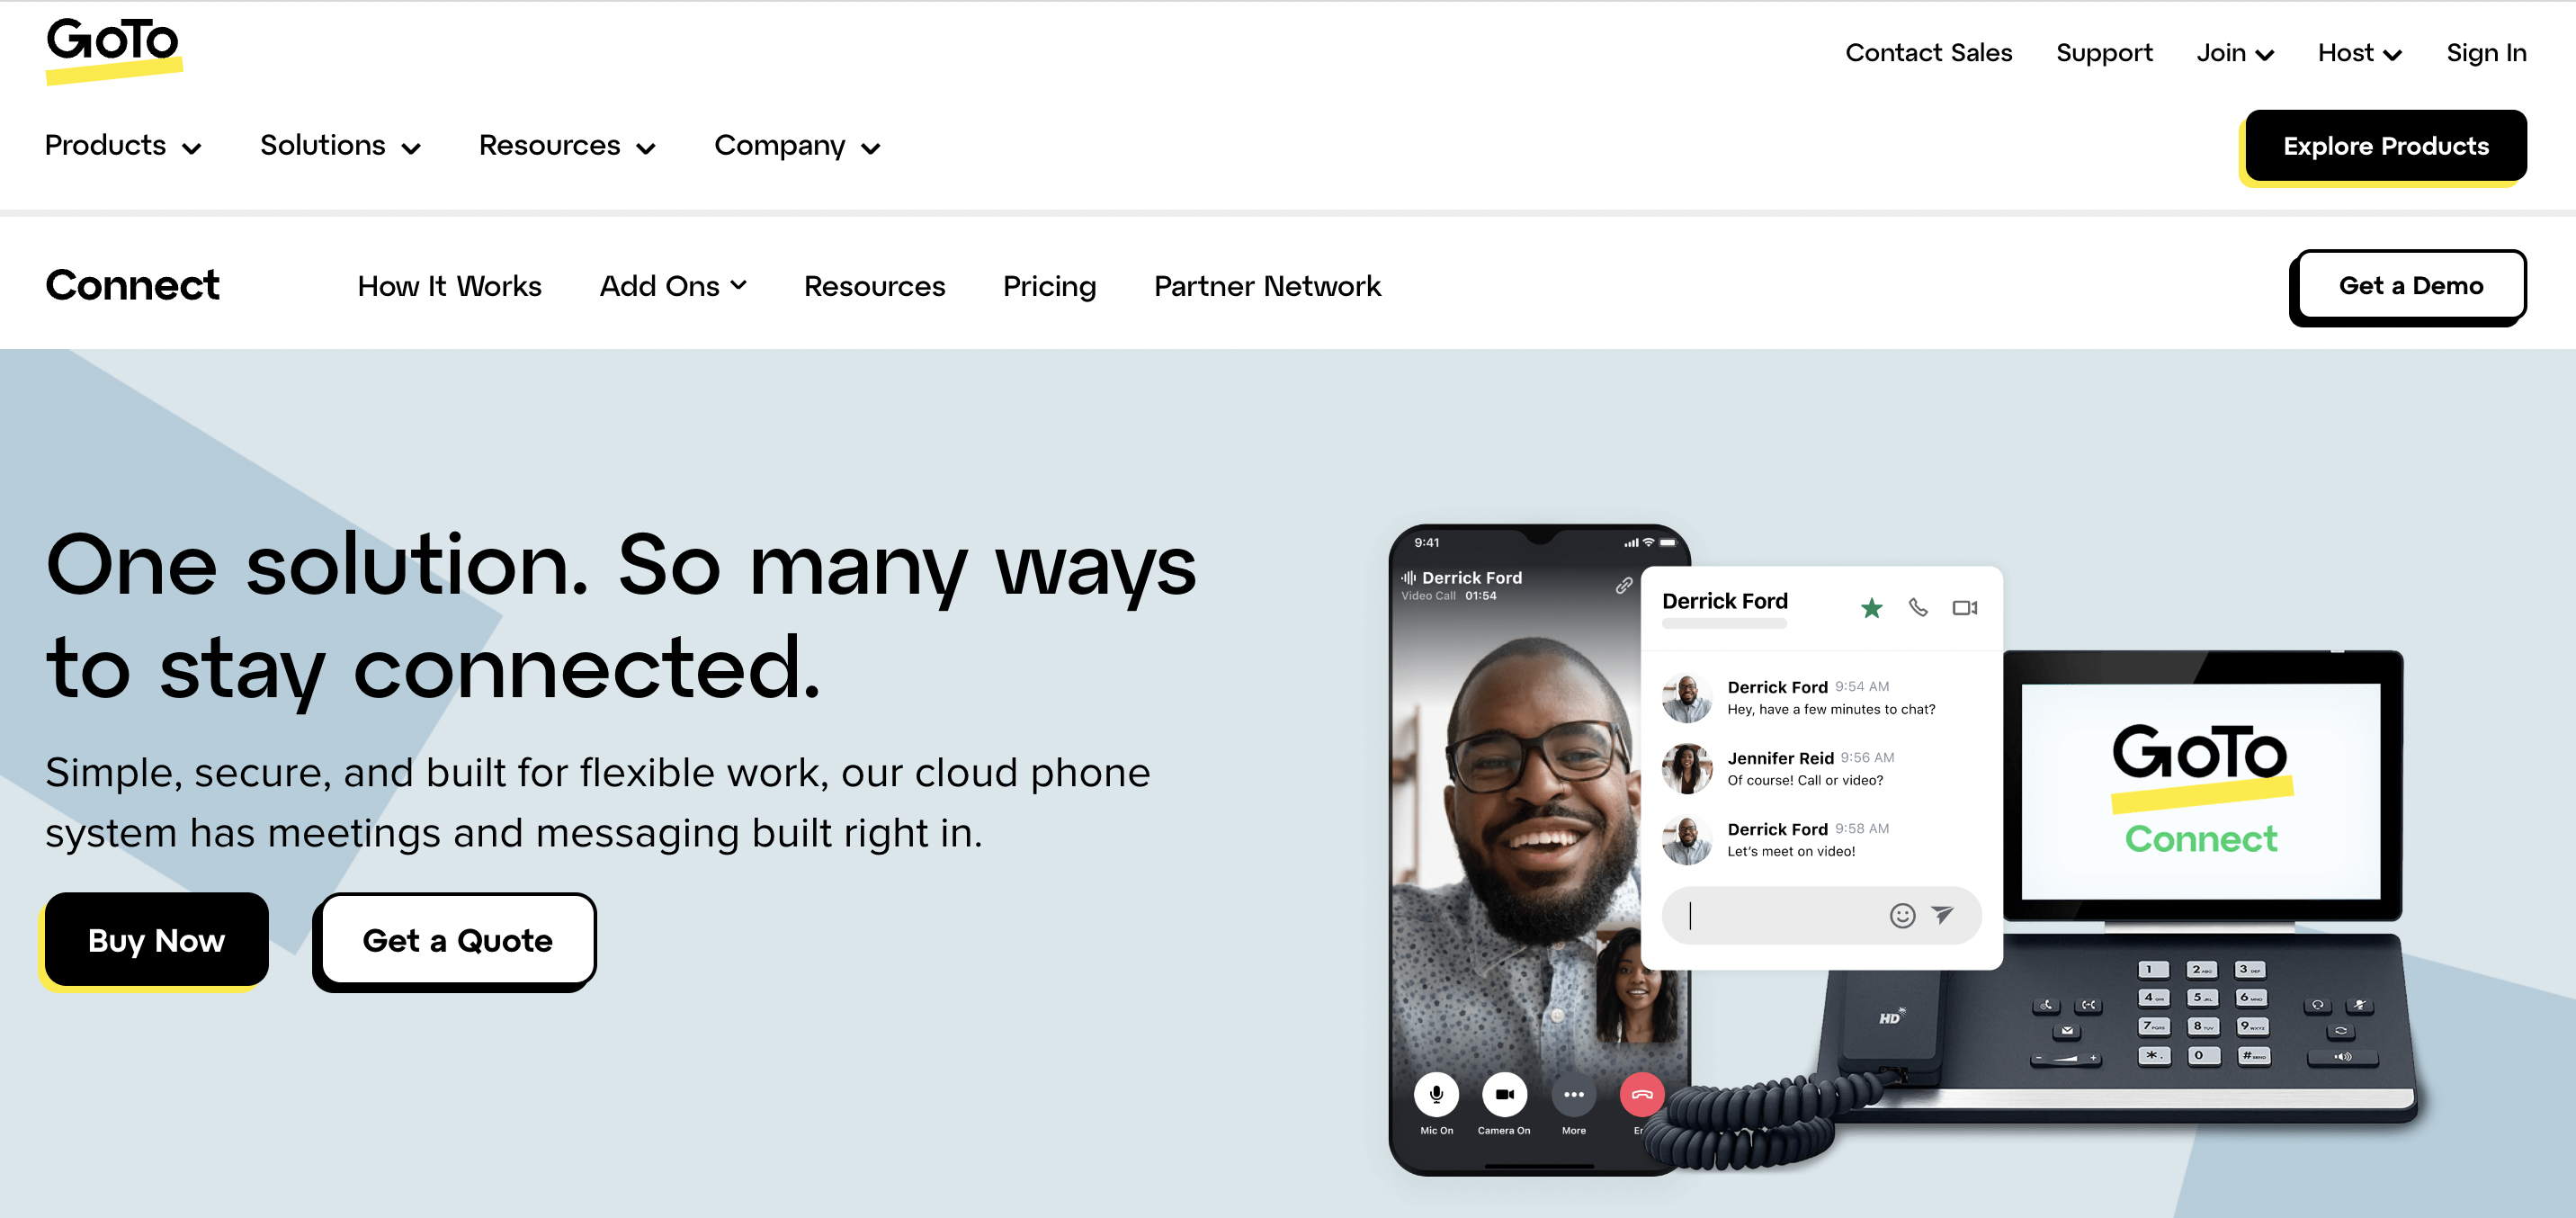 GoTo Connect Landing page